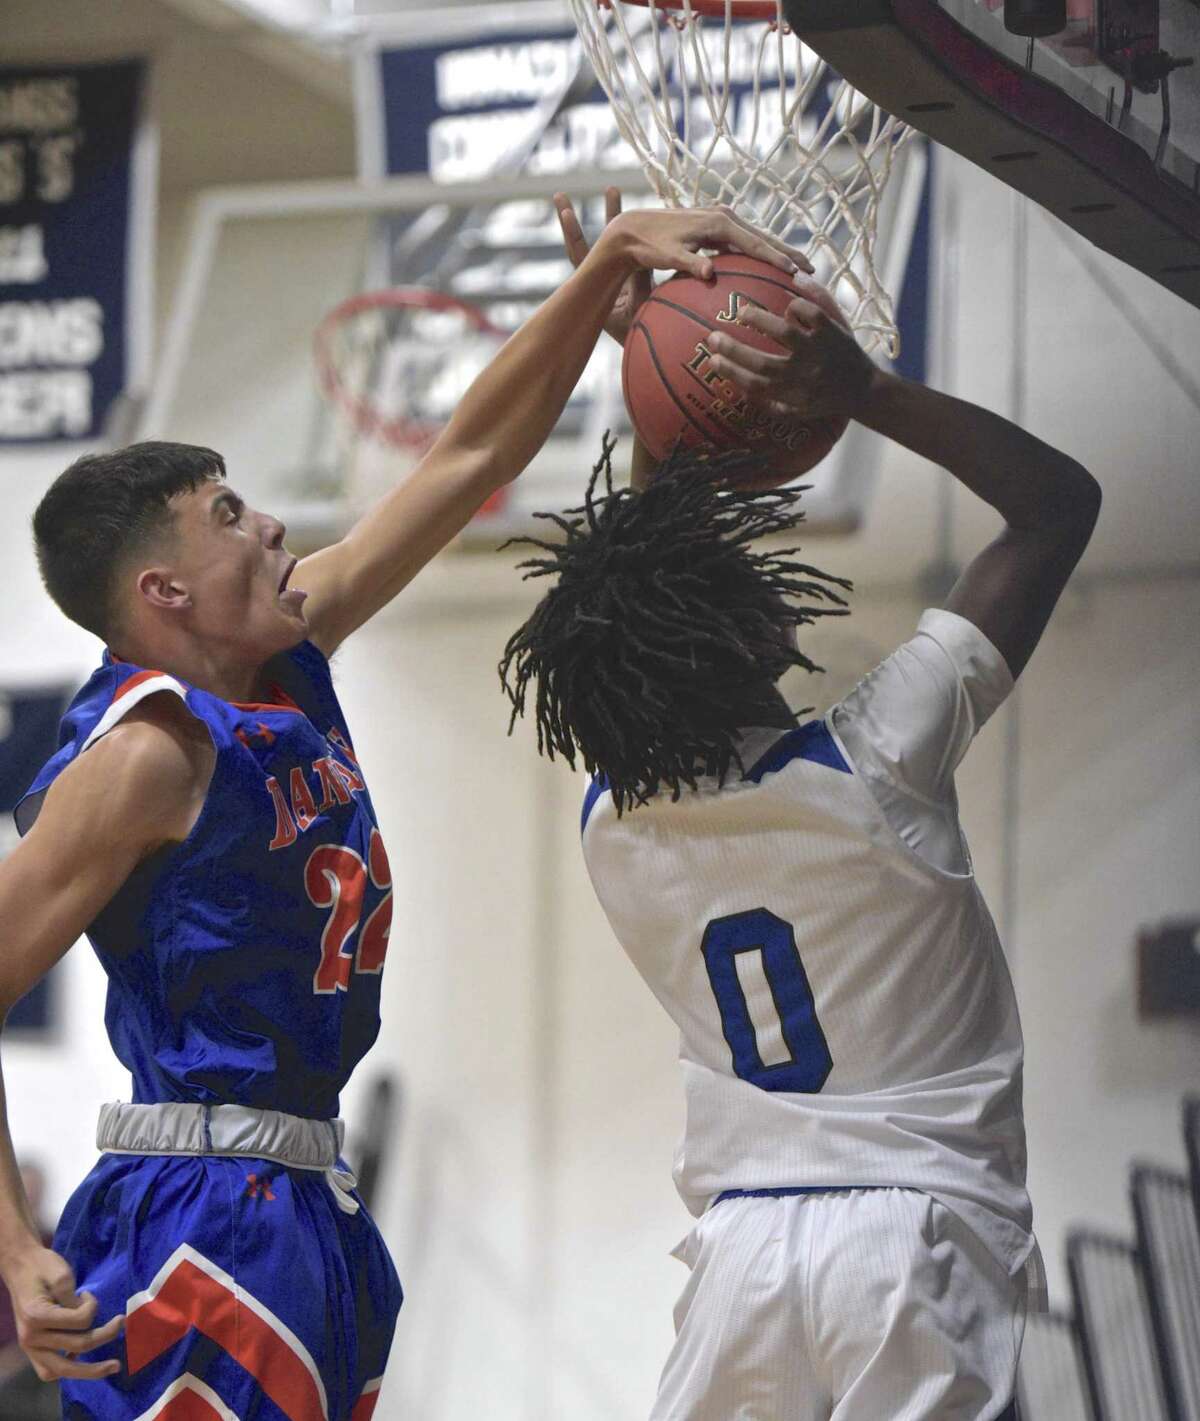 Tech's Nazeer Priar (0) has his shot blocked by Danbury's Kevin Vidmar (22) as Abbott Tech plays Danbury High School in the opening game of The News Times Tip Off Classic basketball tournament, Thursday night, December 13, 2018, at Immaculate High School, in Danbury, Conn.